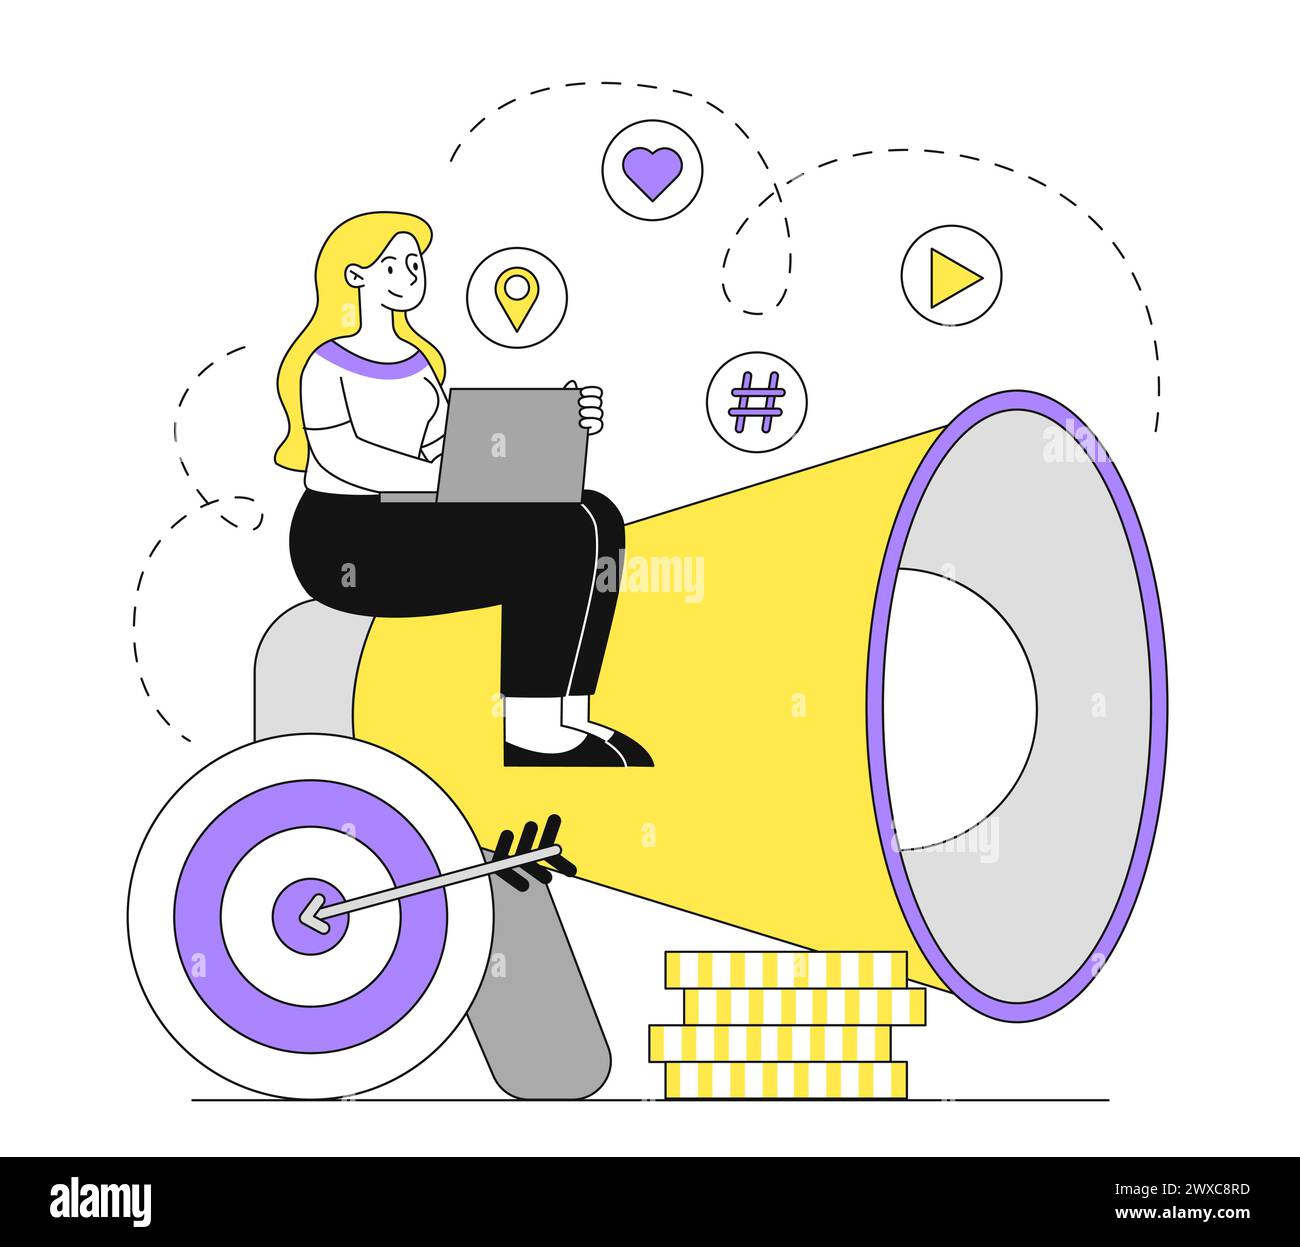 Woman with targeted advertising vector doodle Stock Vector